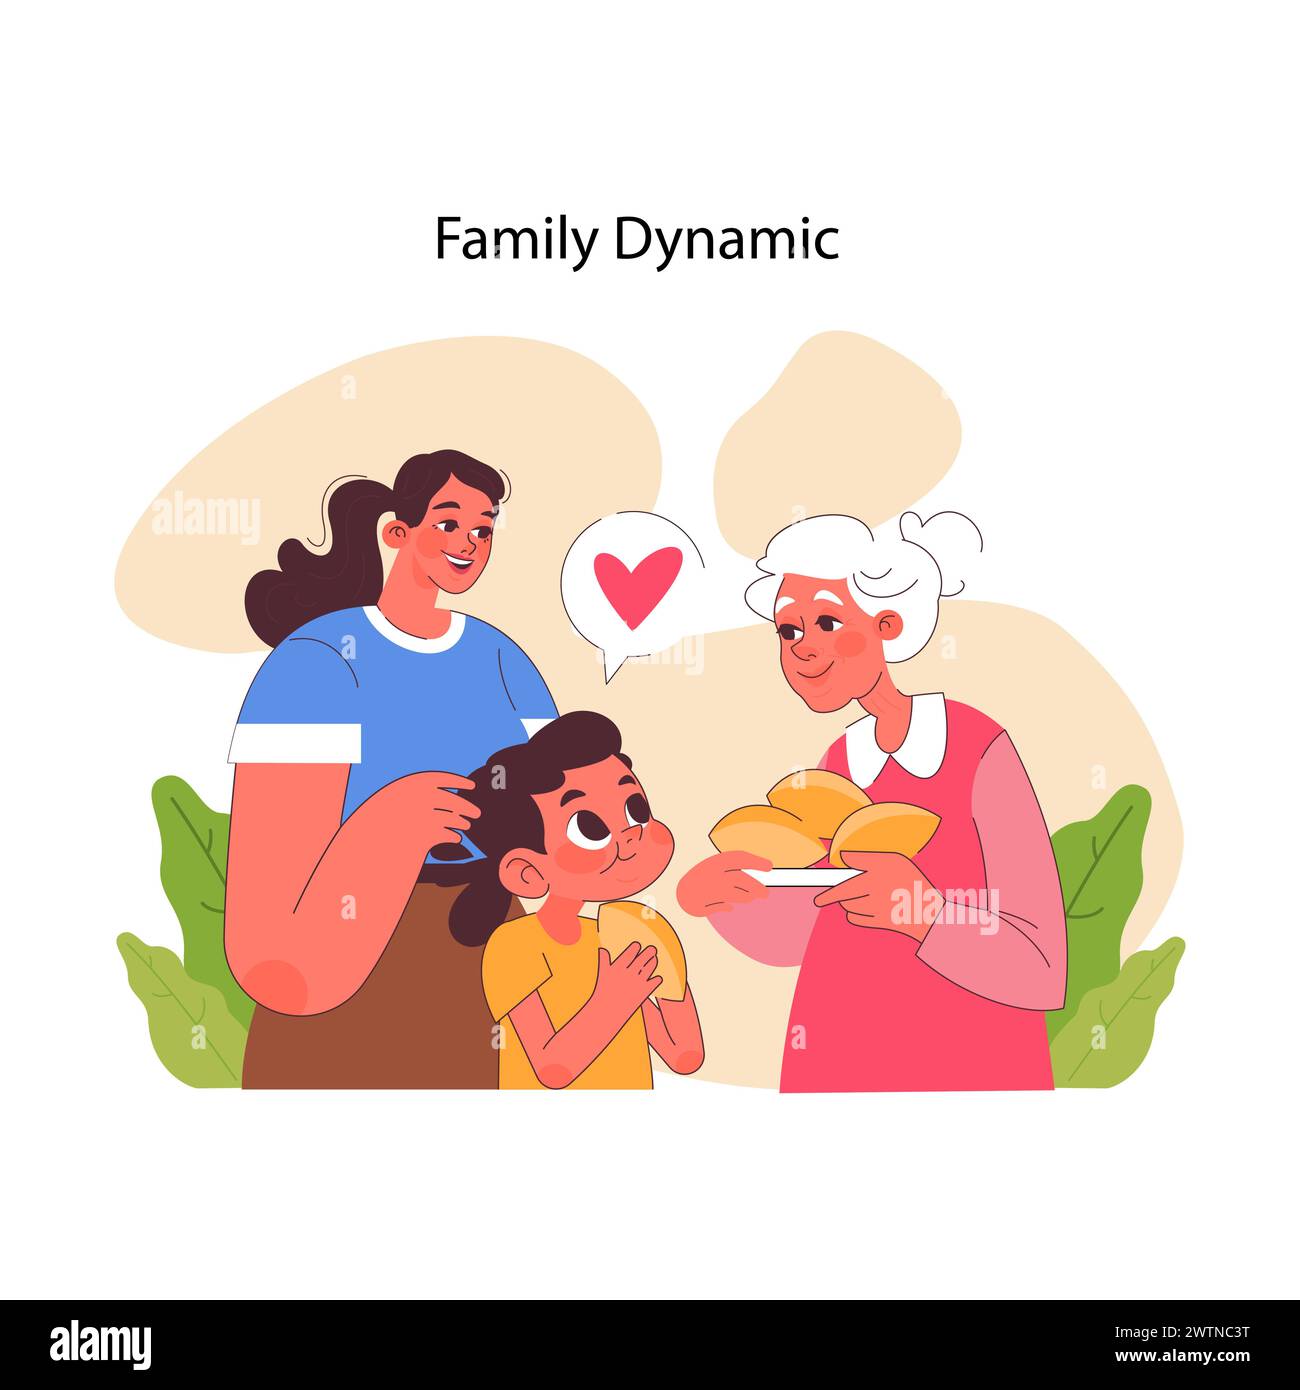 Family Dynamic concept. Heartwarming interaction between grandmother, mother, and child, sharing a moment over a homemade meal. Affectionate multi-generational bonds illustrated. vector illustration. Stock Vector